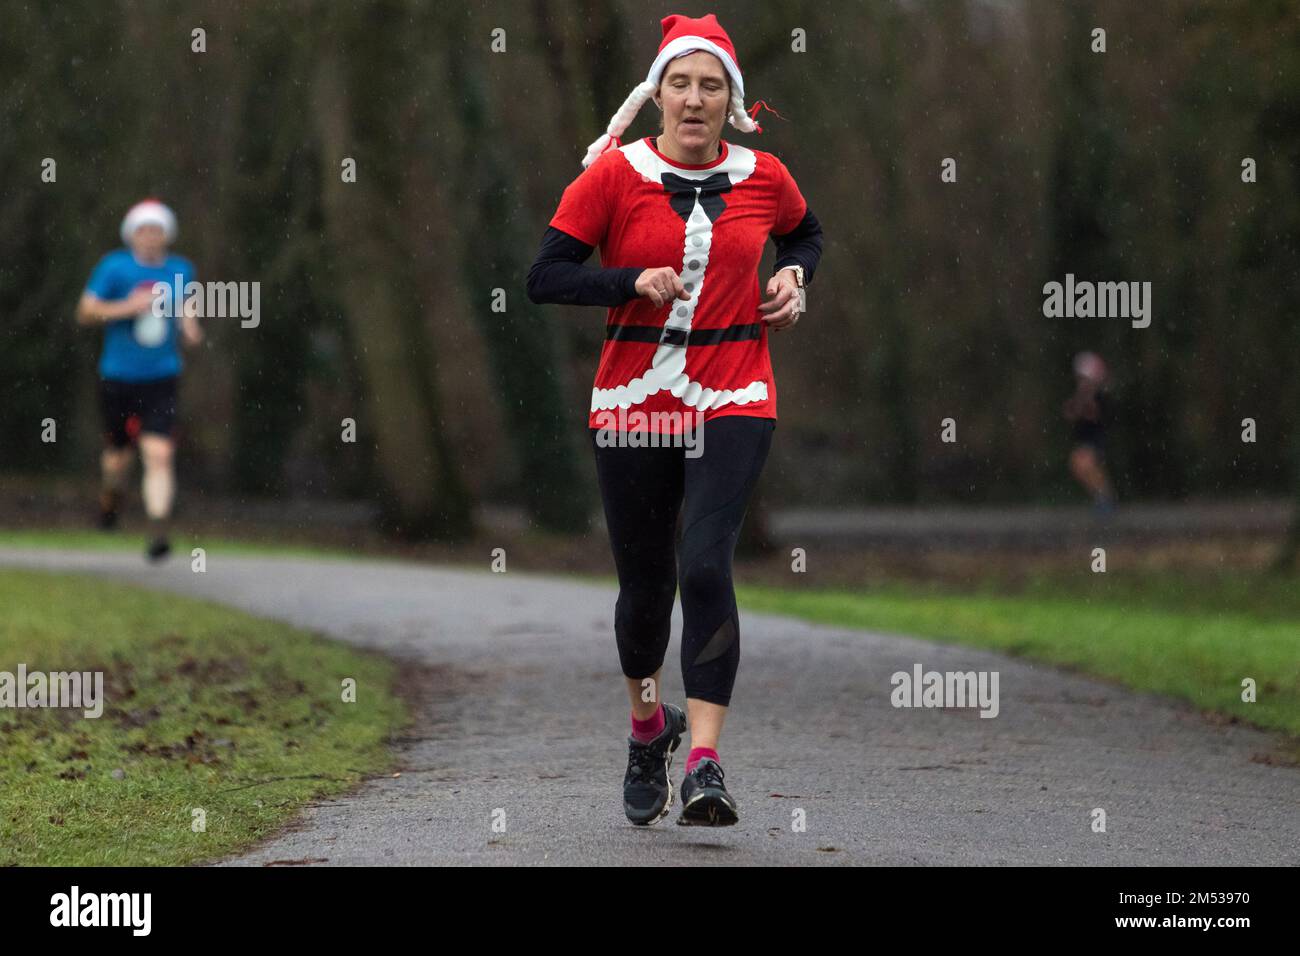 Chippenham, Wiltshire, UK. 25th December, 2022. A runner in fancy dress is pictured as she takes part in an early morning Christmas day 5km parkrun in Monkton Park, Chippenham, Wiltshire. The wet weather did nothing to dampen the spirits of the 200-300 people who participated in the event with many of them dressing up in fancy dress. Credit: Lynchpics/Alamy Live News Stock Photo